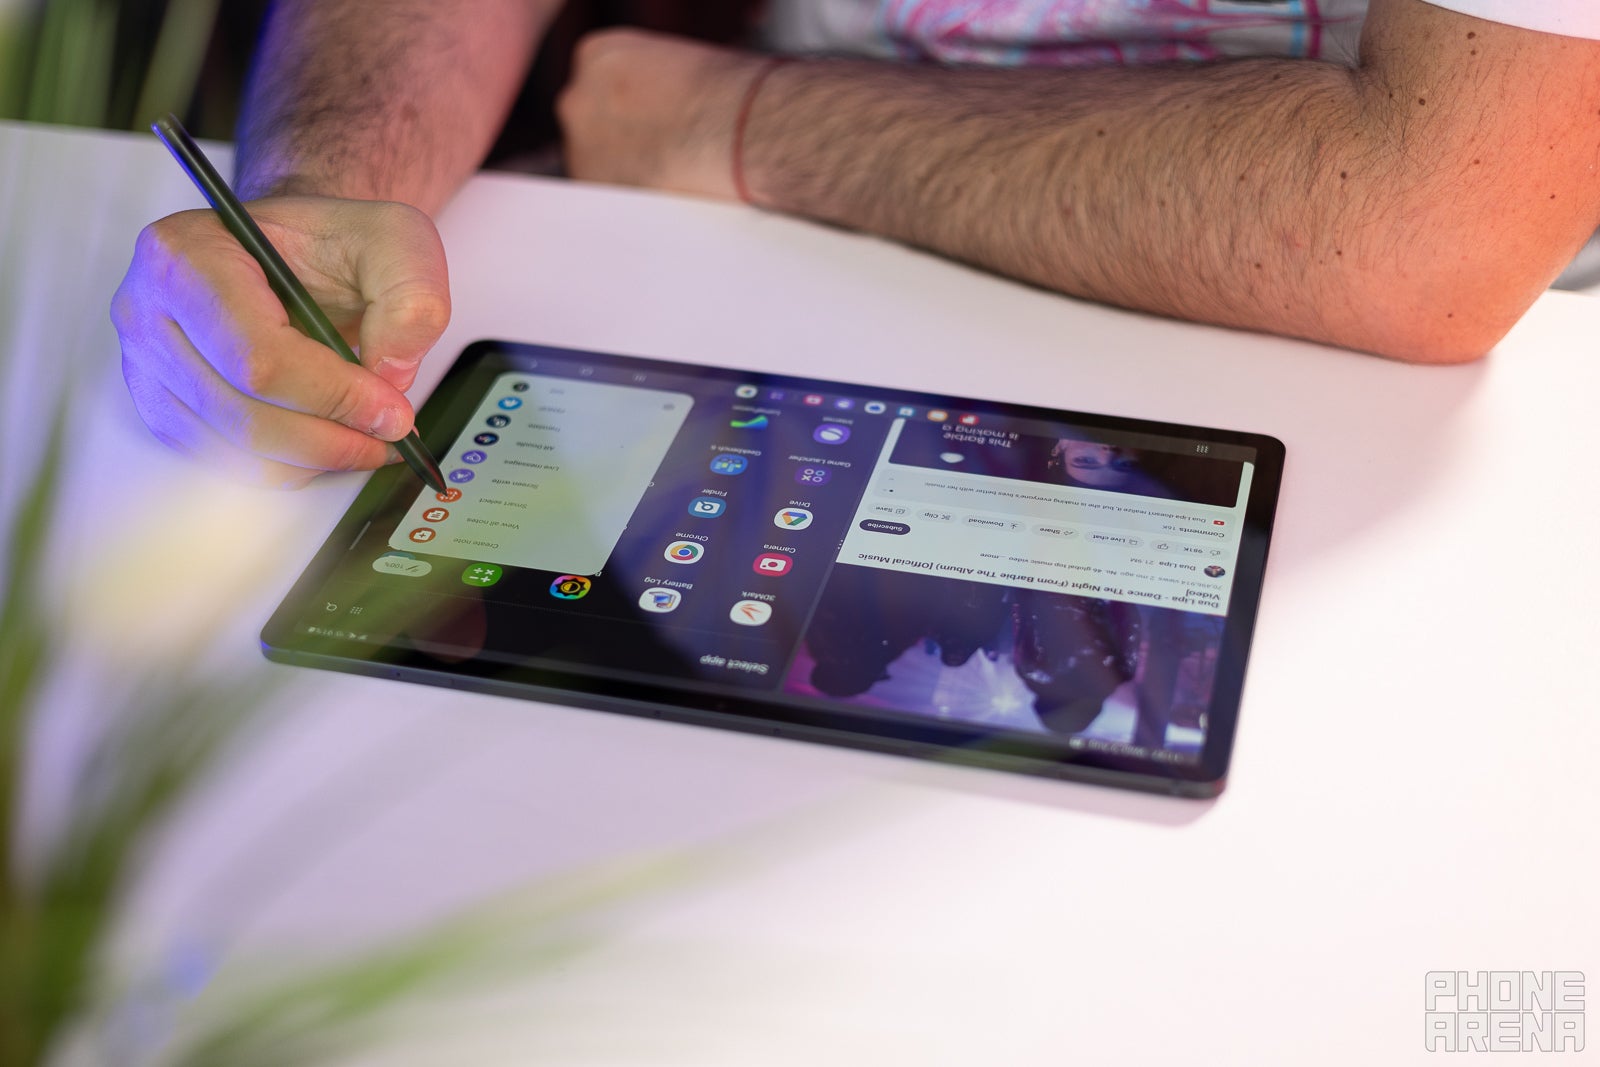 Samsung Galaxy Tab S9 Plus PhoneArena great Review: - A one